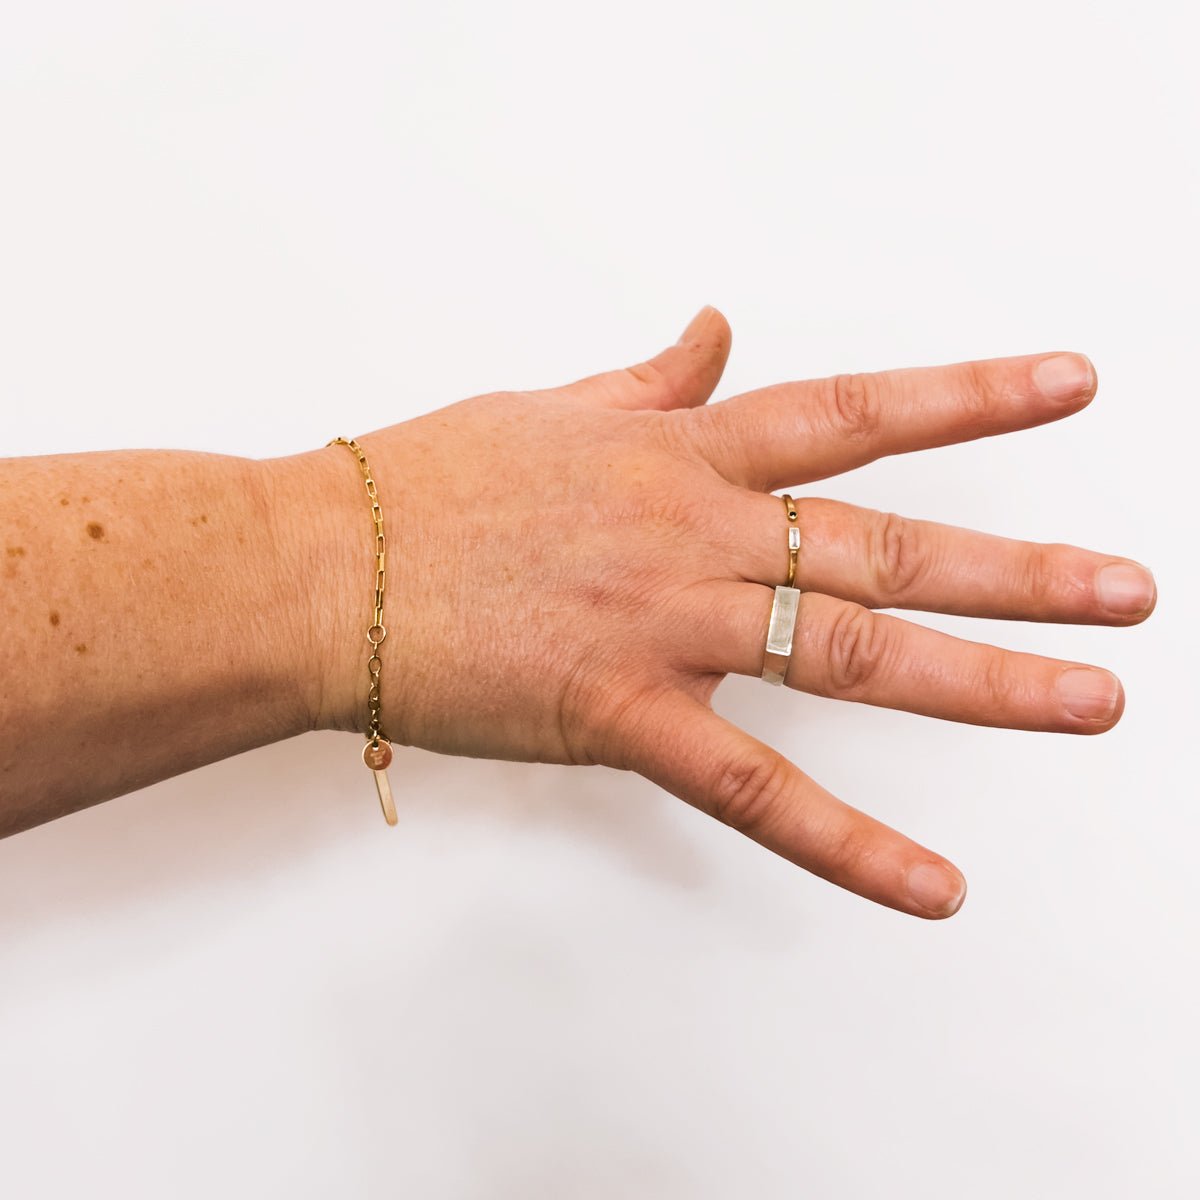 A model wears a delicate gold fill chain link bracelet with two petite rectangular tags, lobster clasp and jump rings to allow for adjustability. The Alba Bracelet is designed and handcrafted in Portland, Oregon.